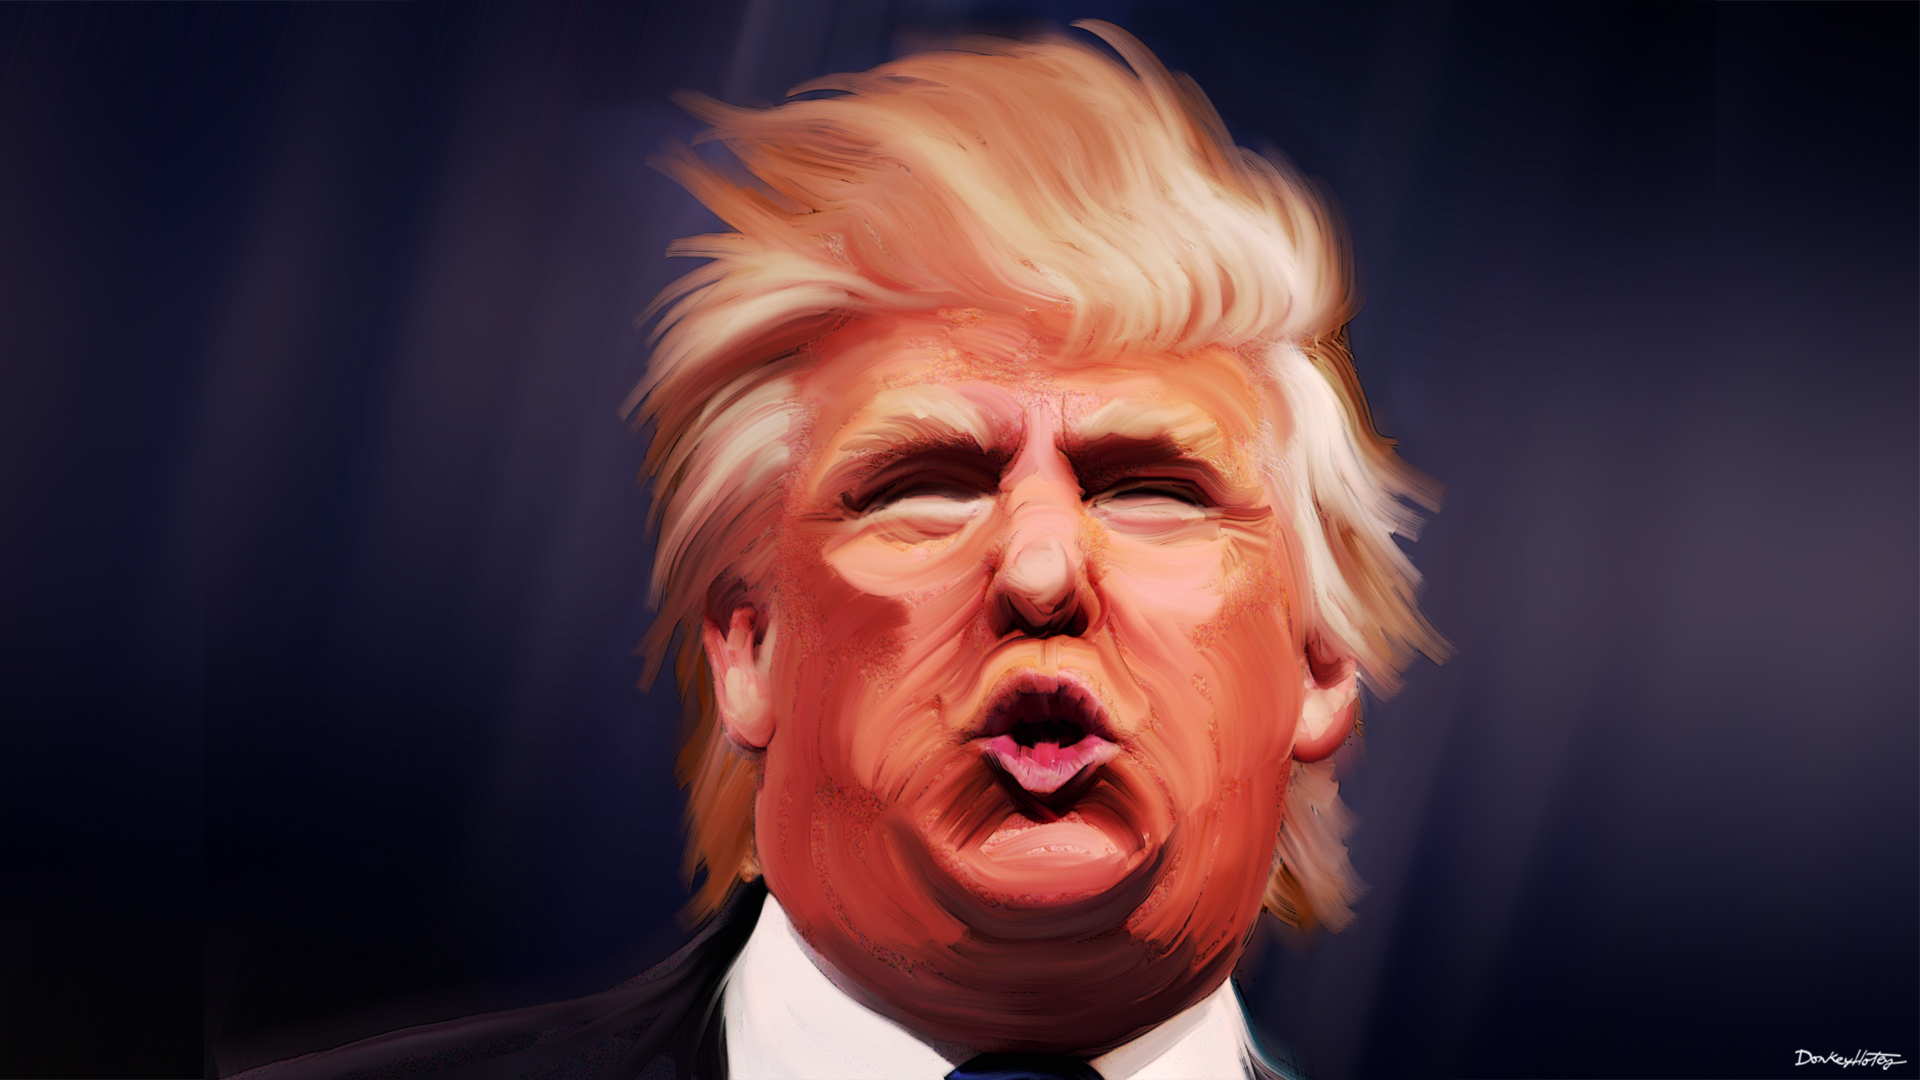 Painting of Donald Trump